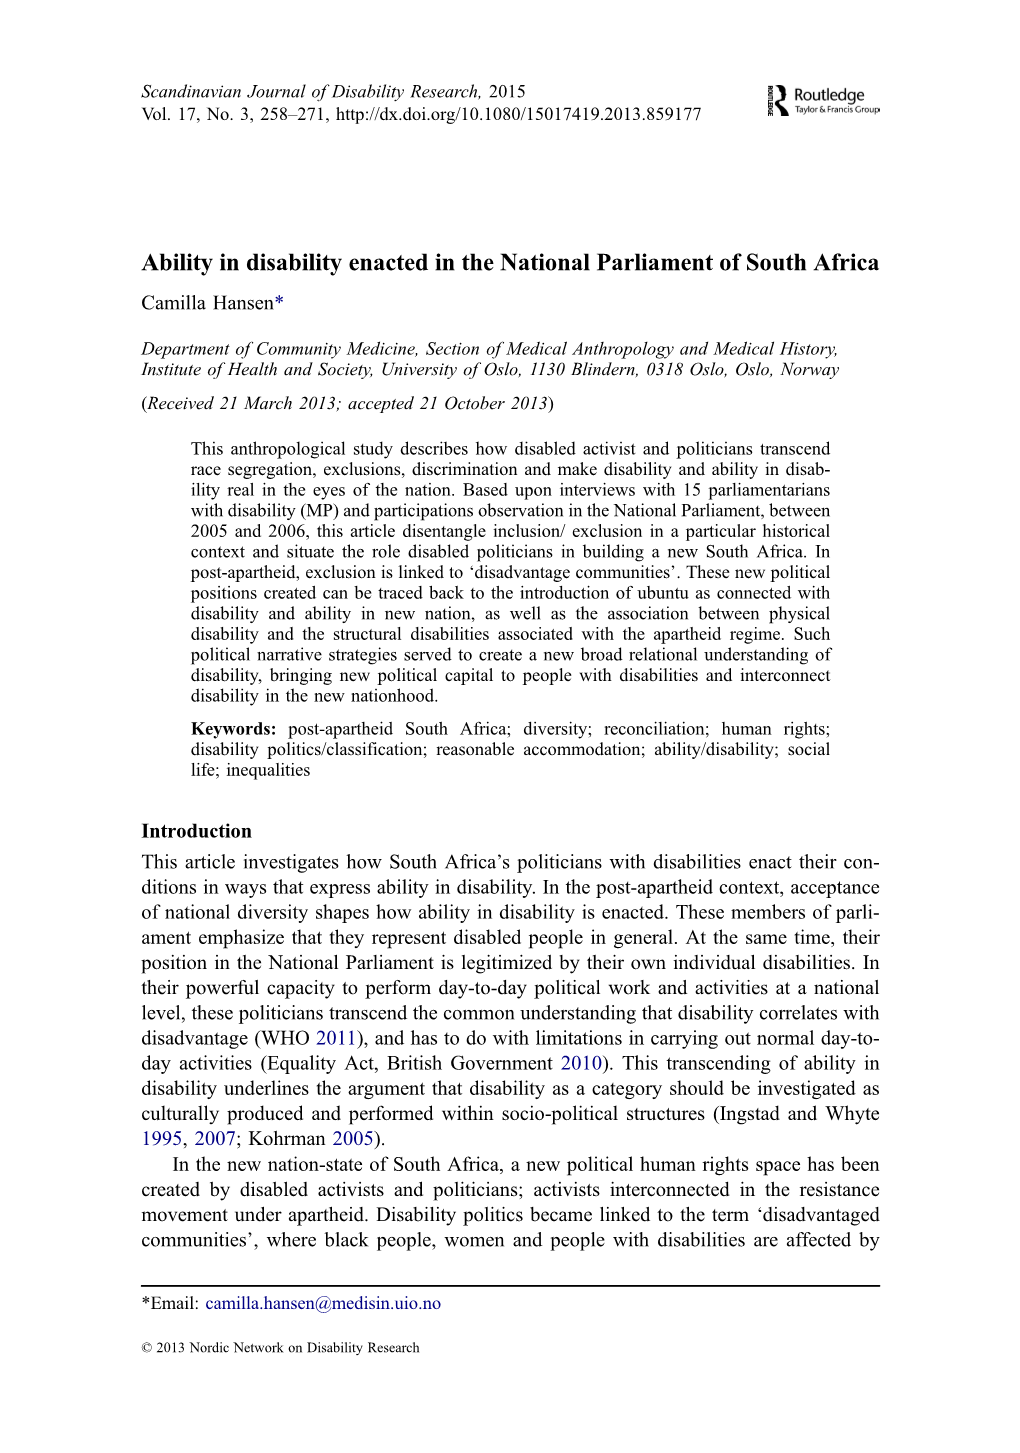 Ability in Disability Enacted in the National Parliament of South Africa Camilla Hansen*